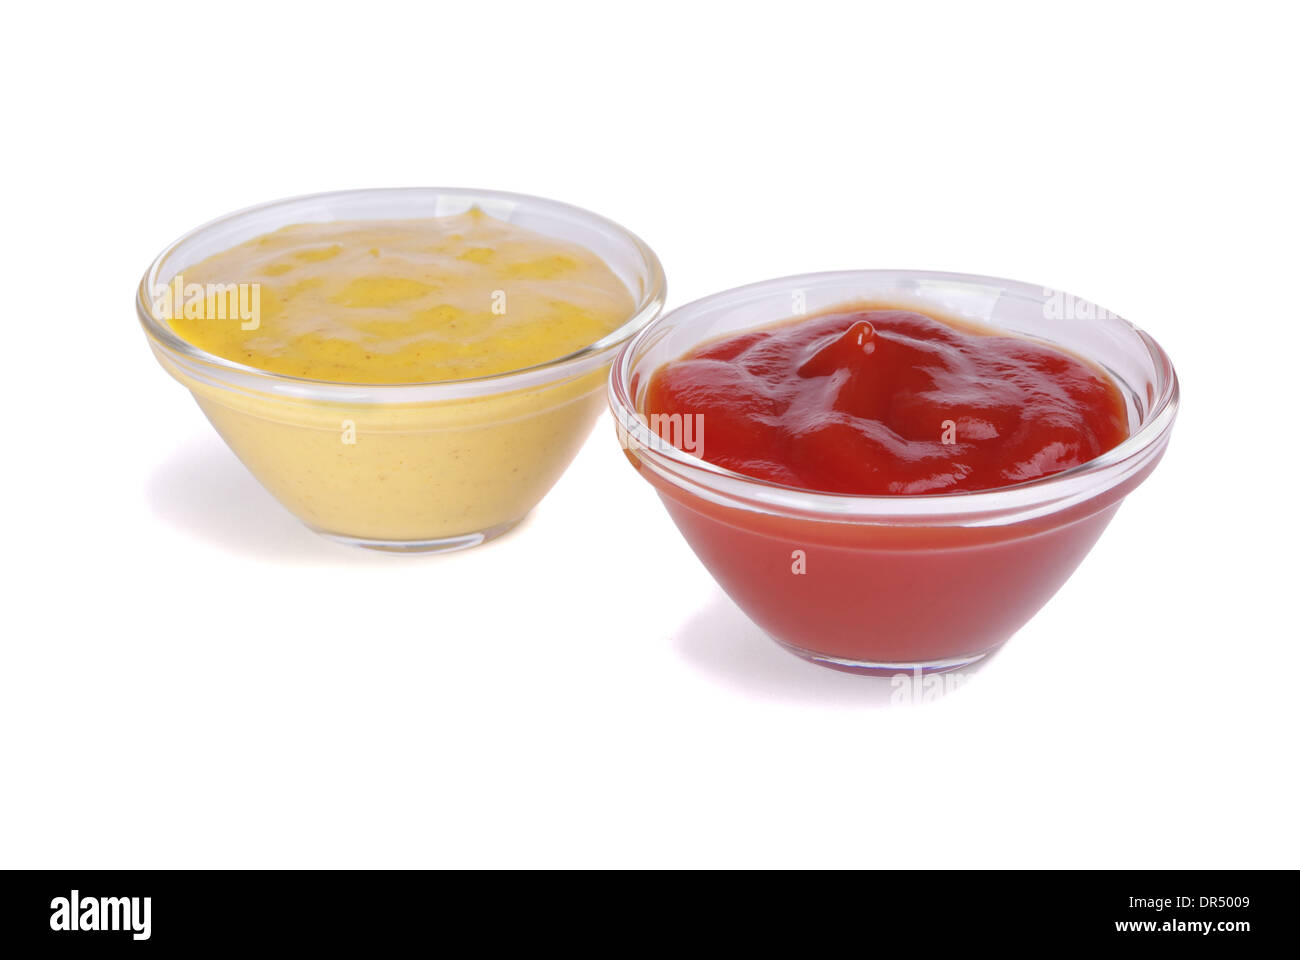 Ketchup and curry in bowl on a white background Stock Photo